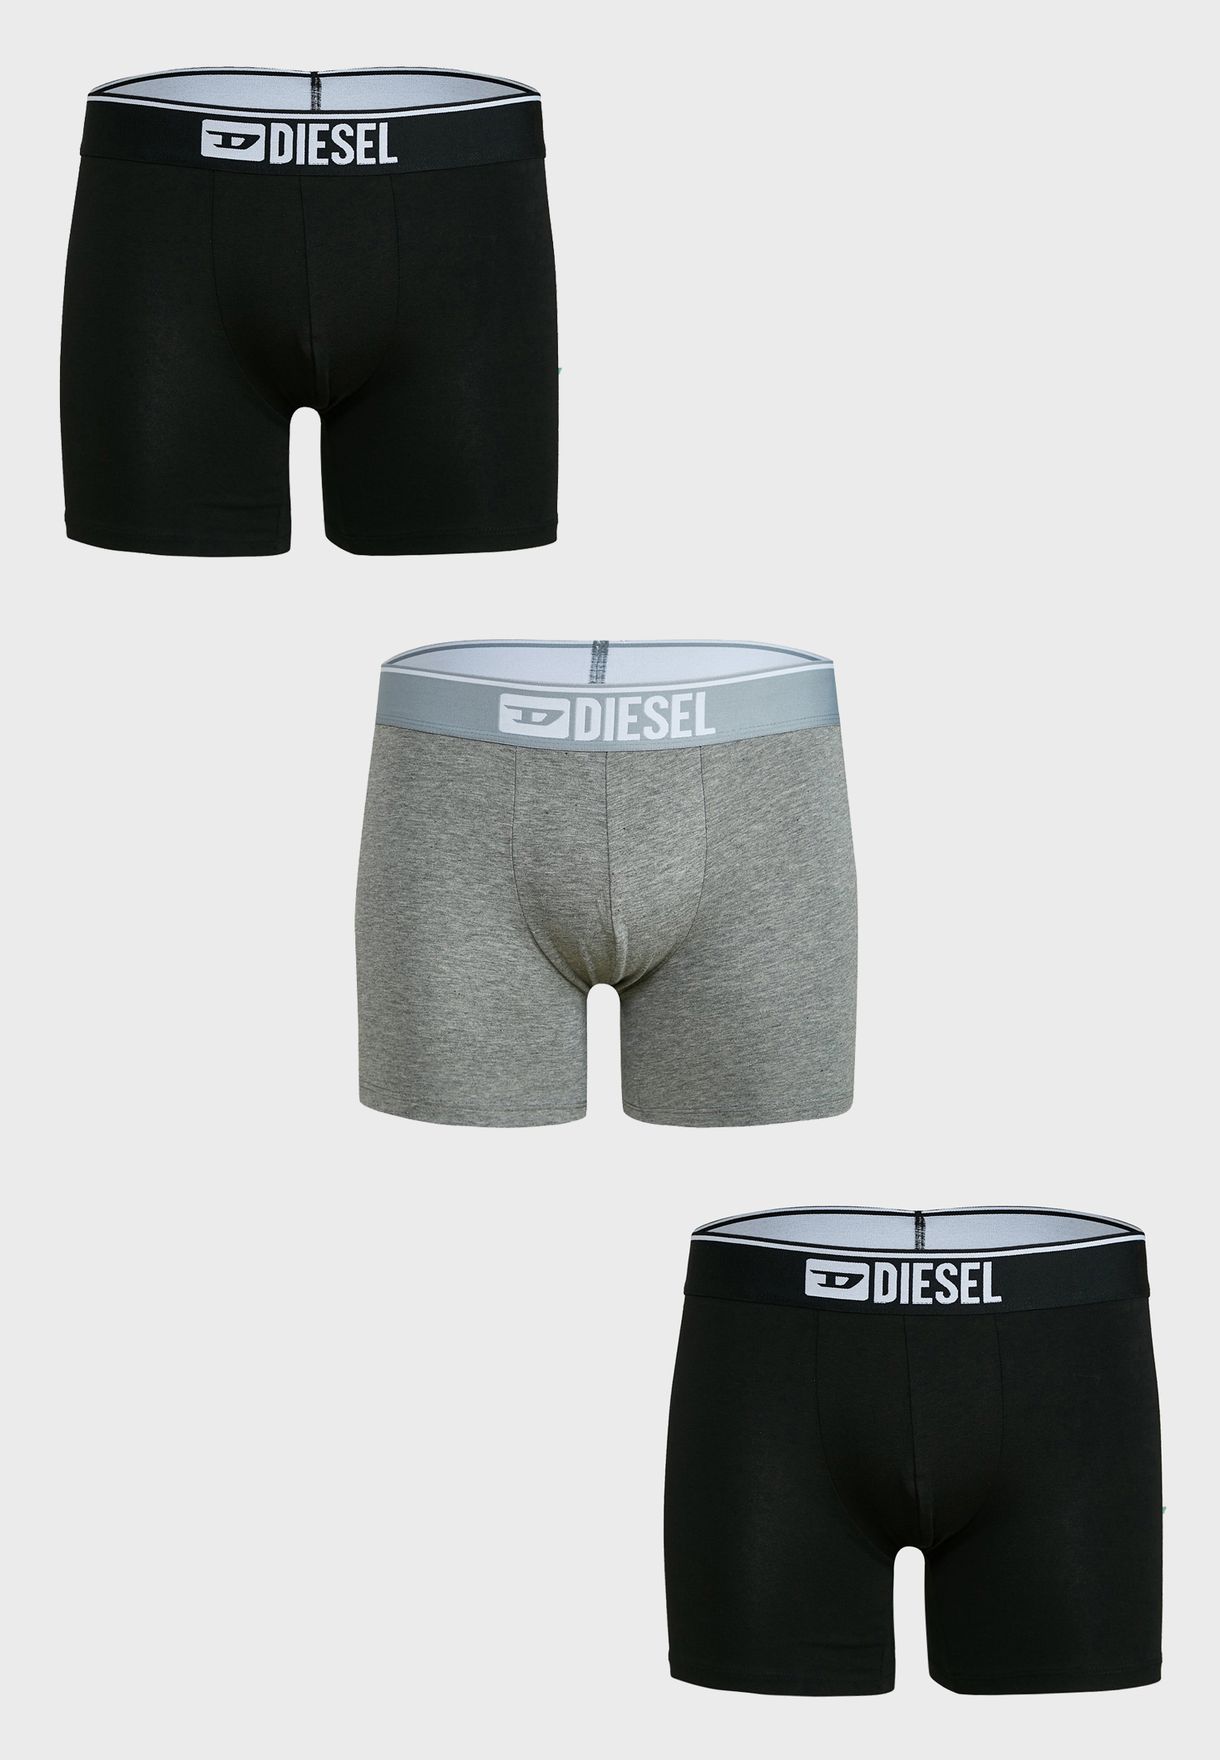 3 Pack Logo Band Assorted Trunks